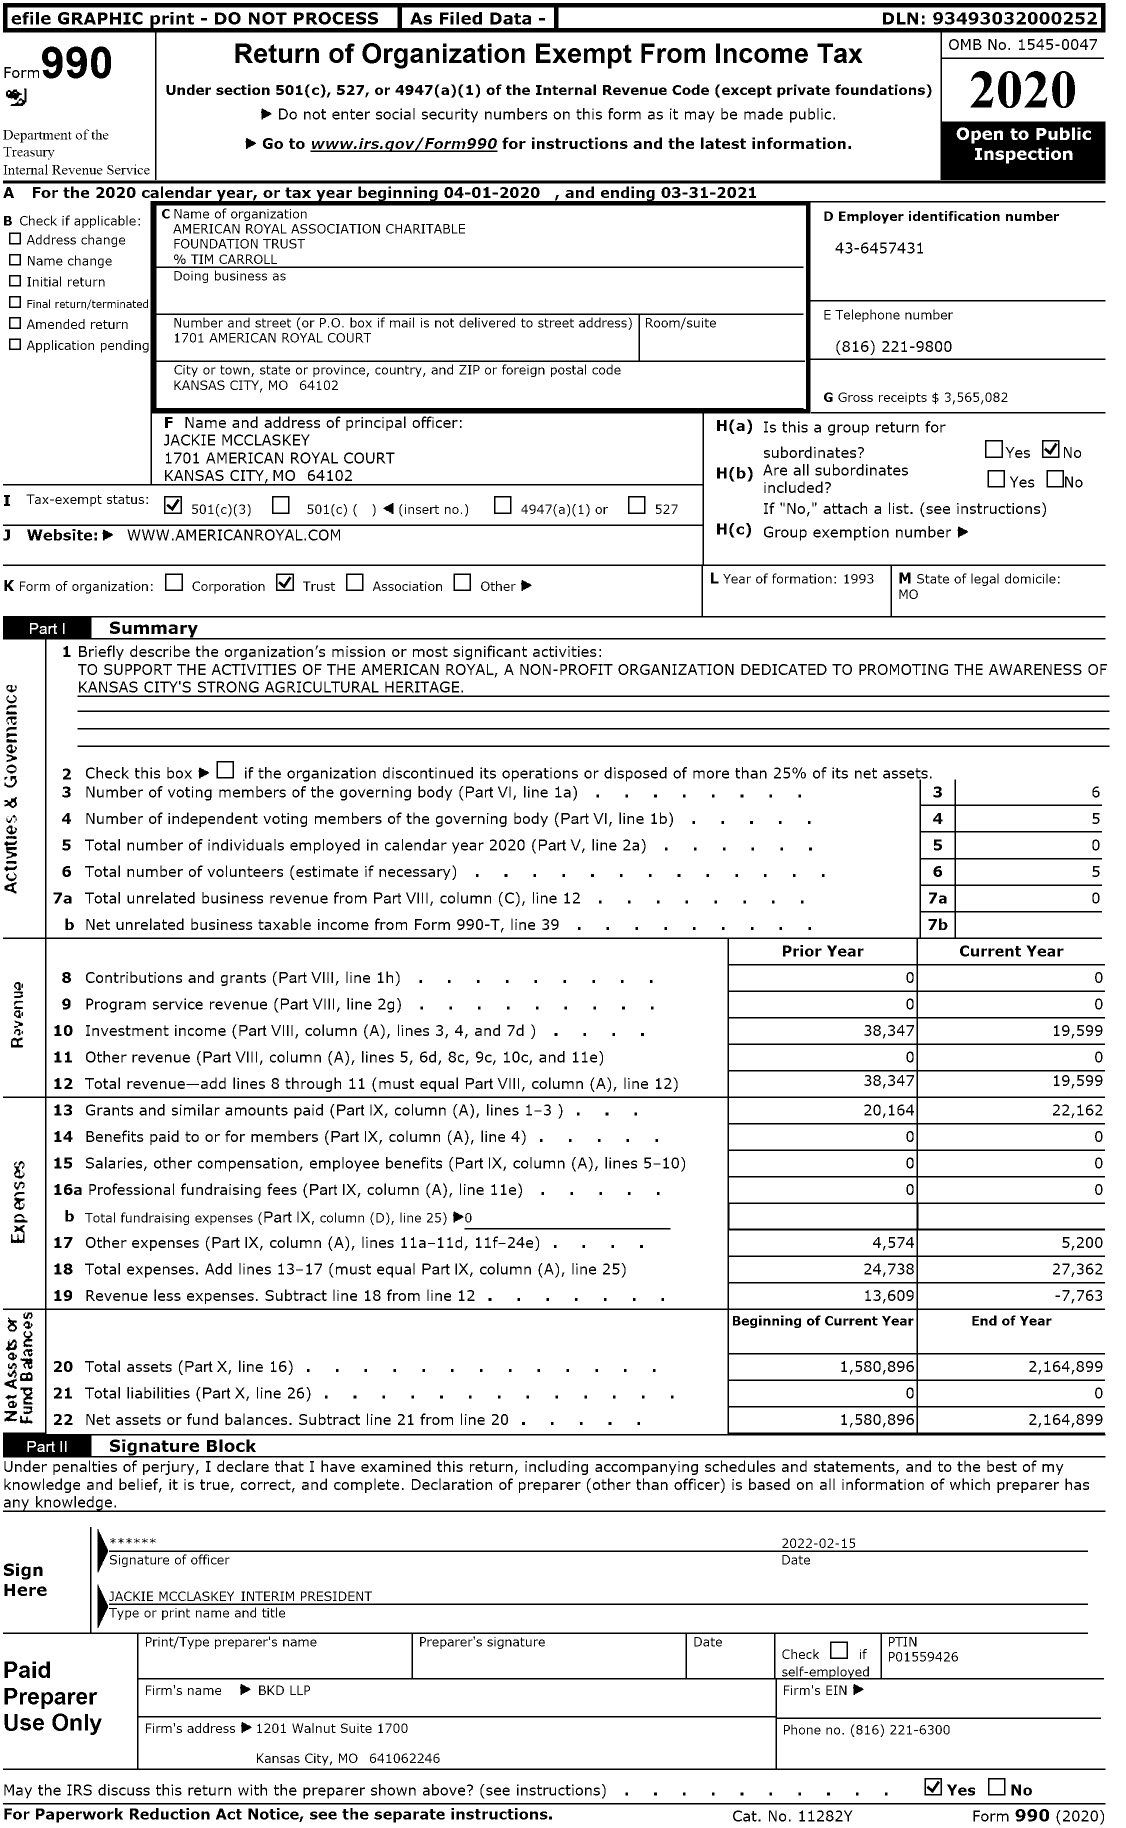 Image of first page of 2020 Form 990 for The American Royal Association Charitable Foundation Trust